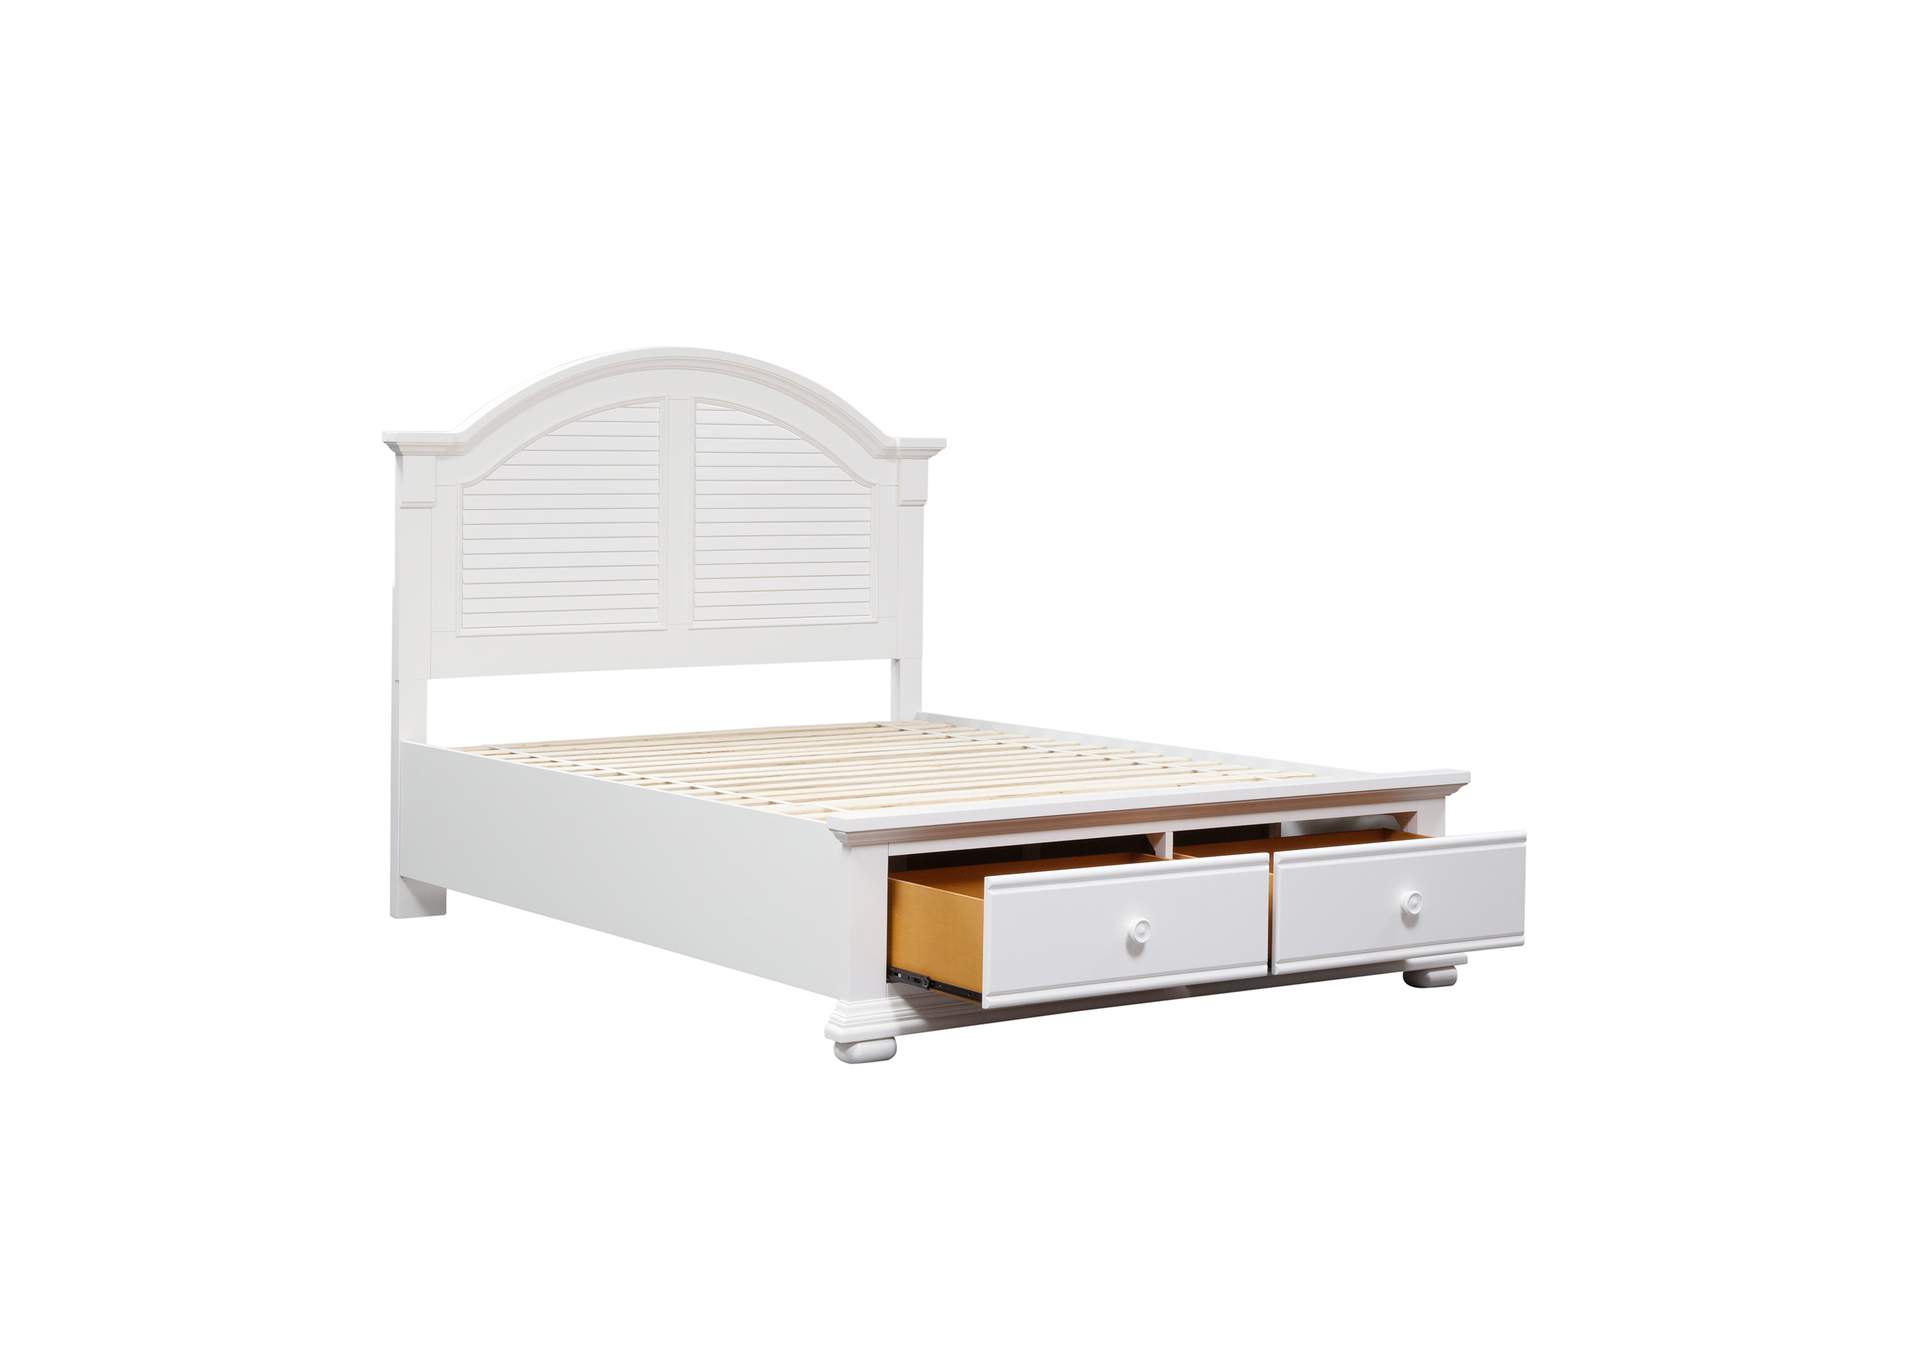 Summer House I King Storage Bed,Liberty